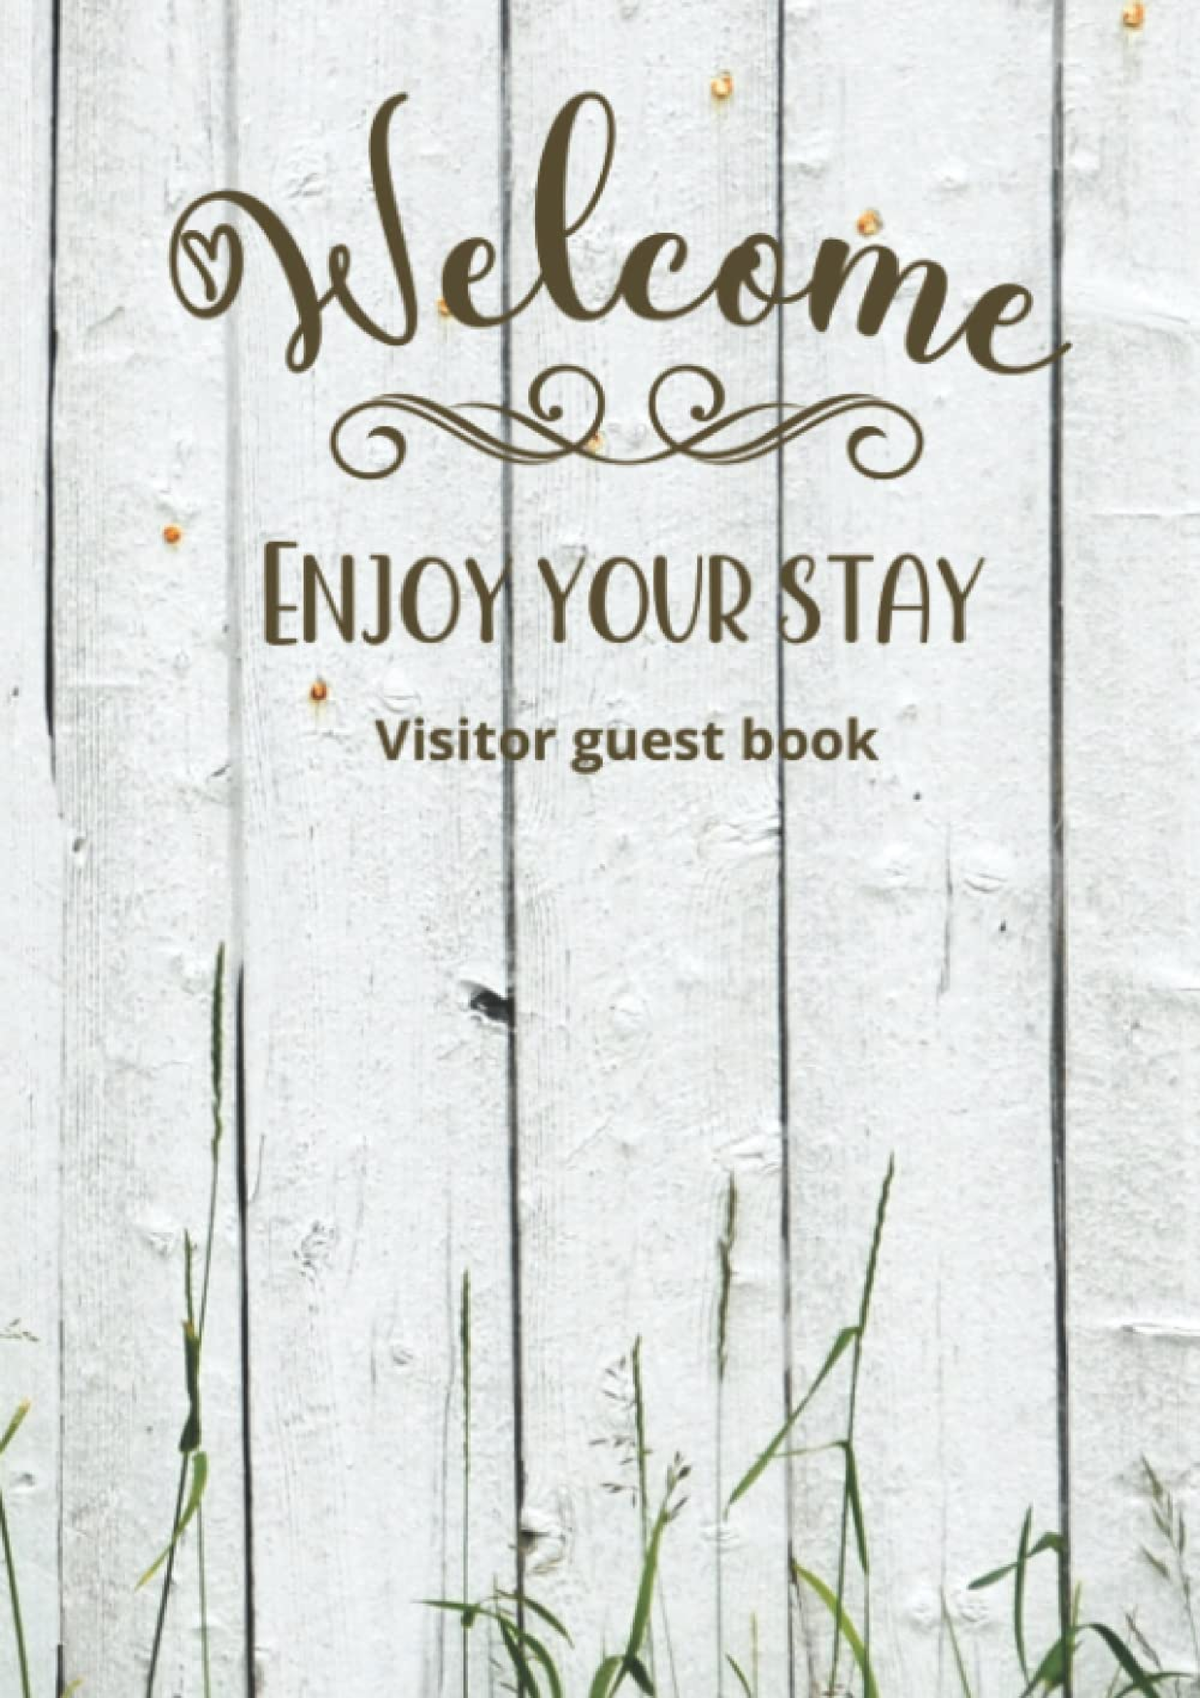 Visitors guest book Welcome Enjoy your stay: Log book for Vacation